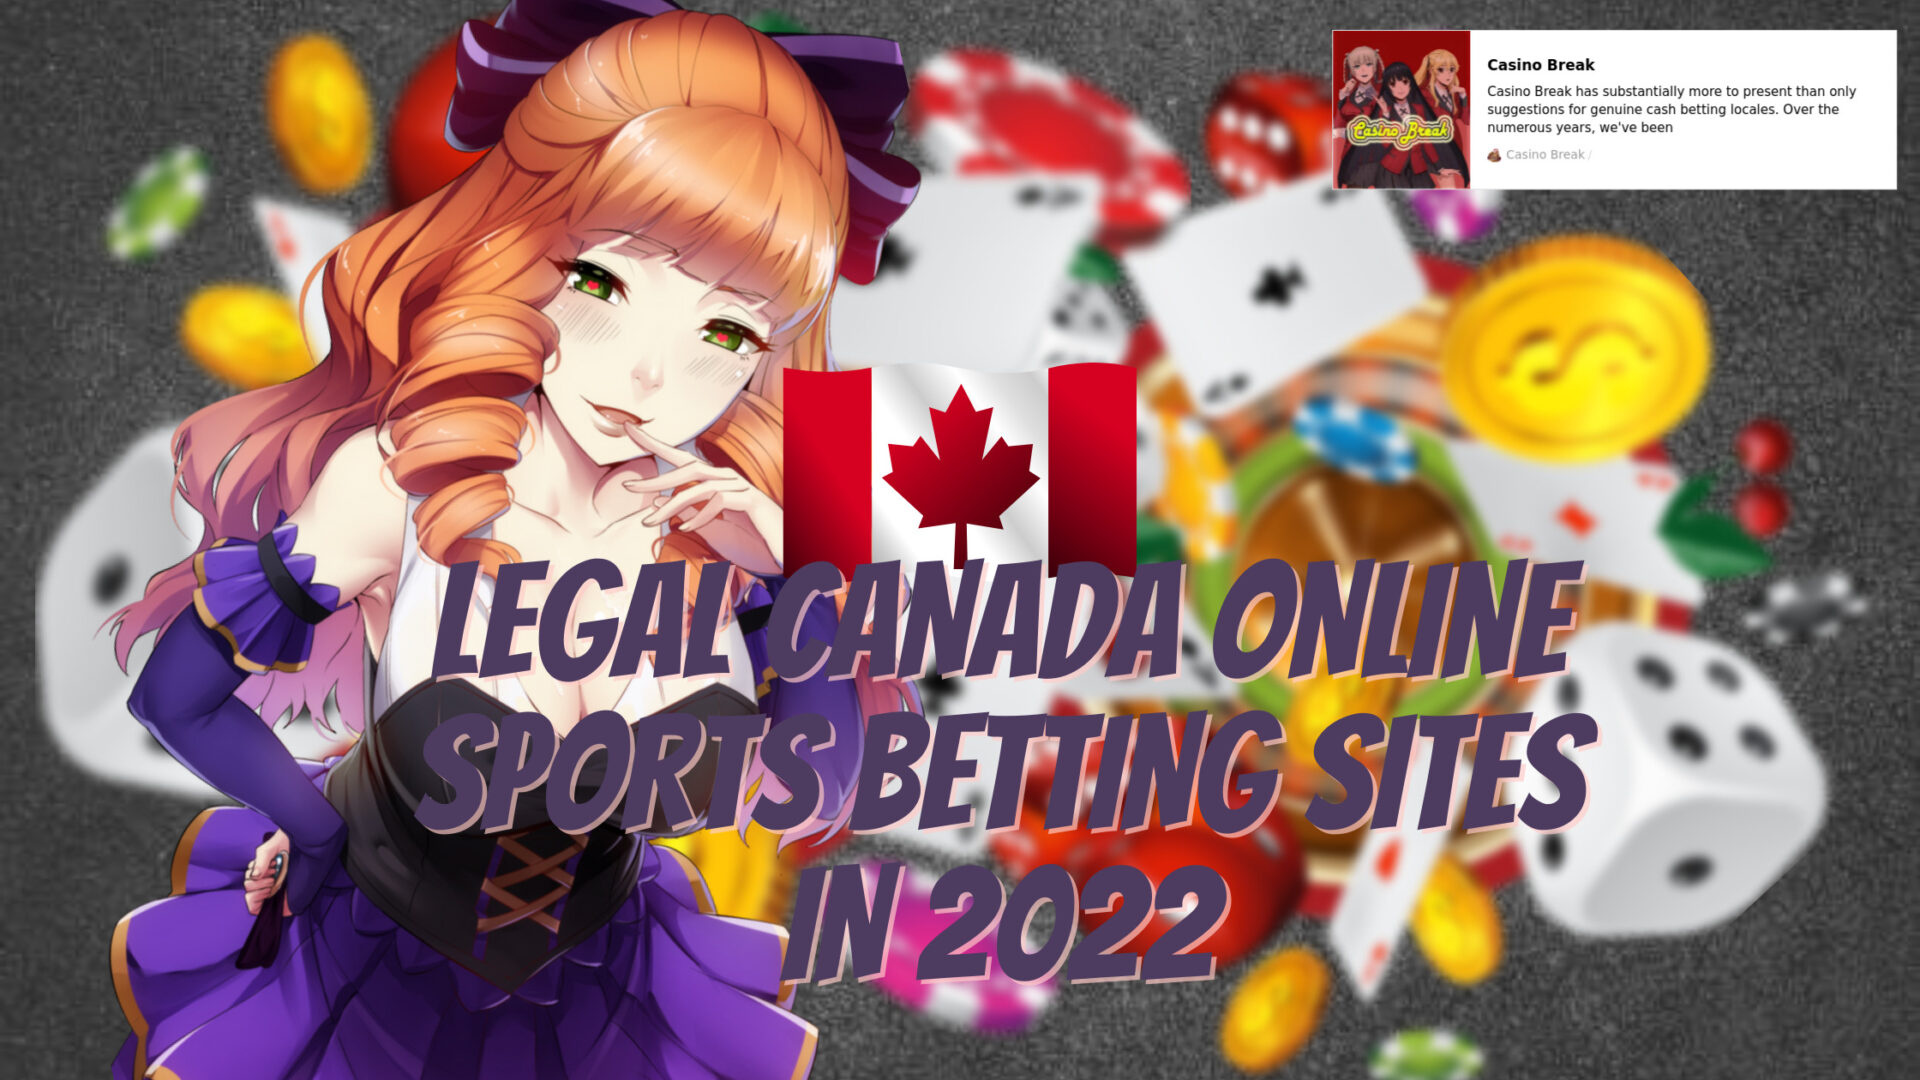 Legal Canada Online Sports Betting Sites in 2022